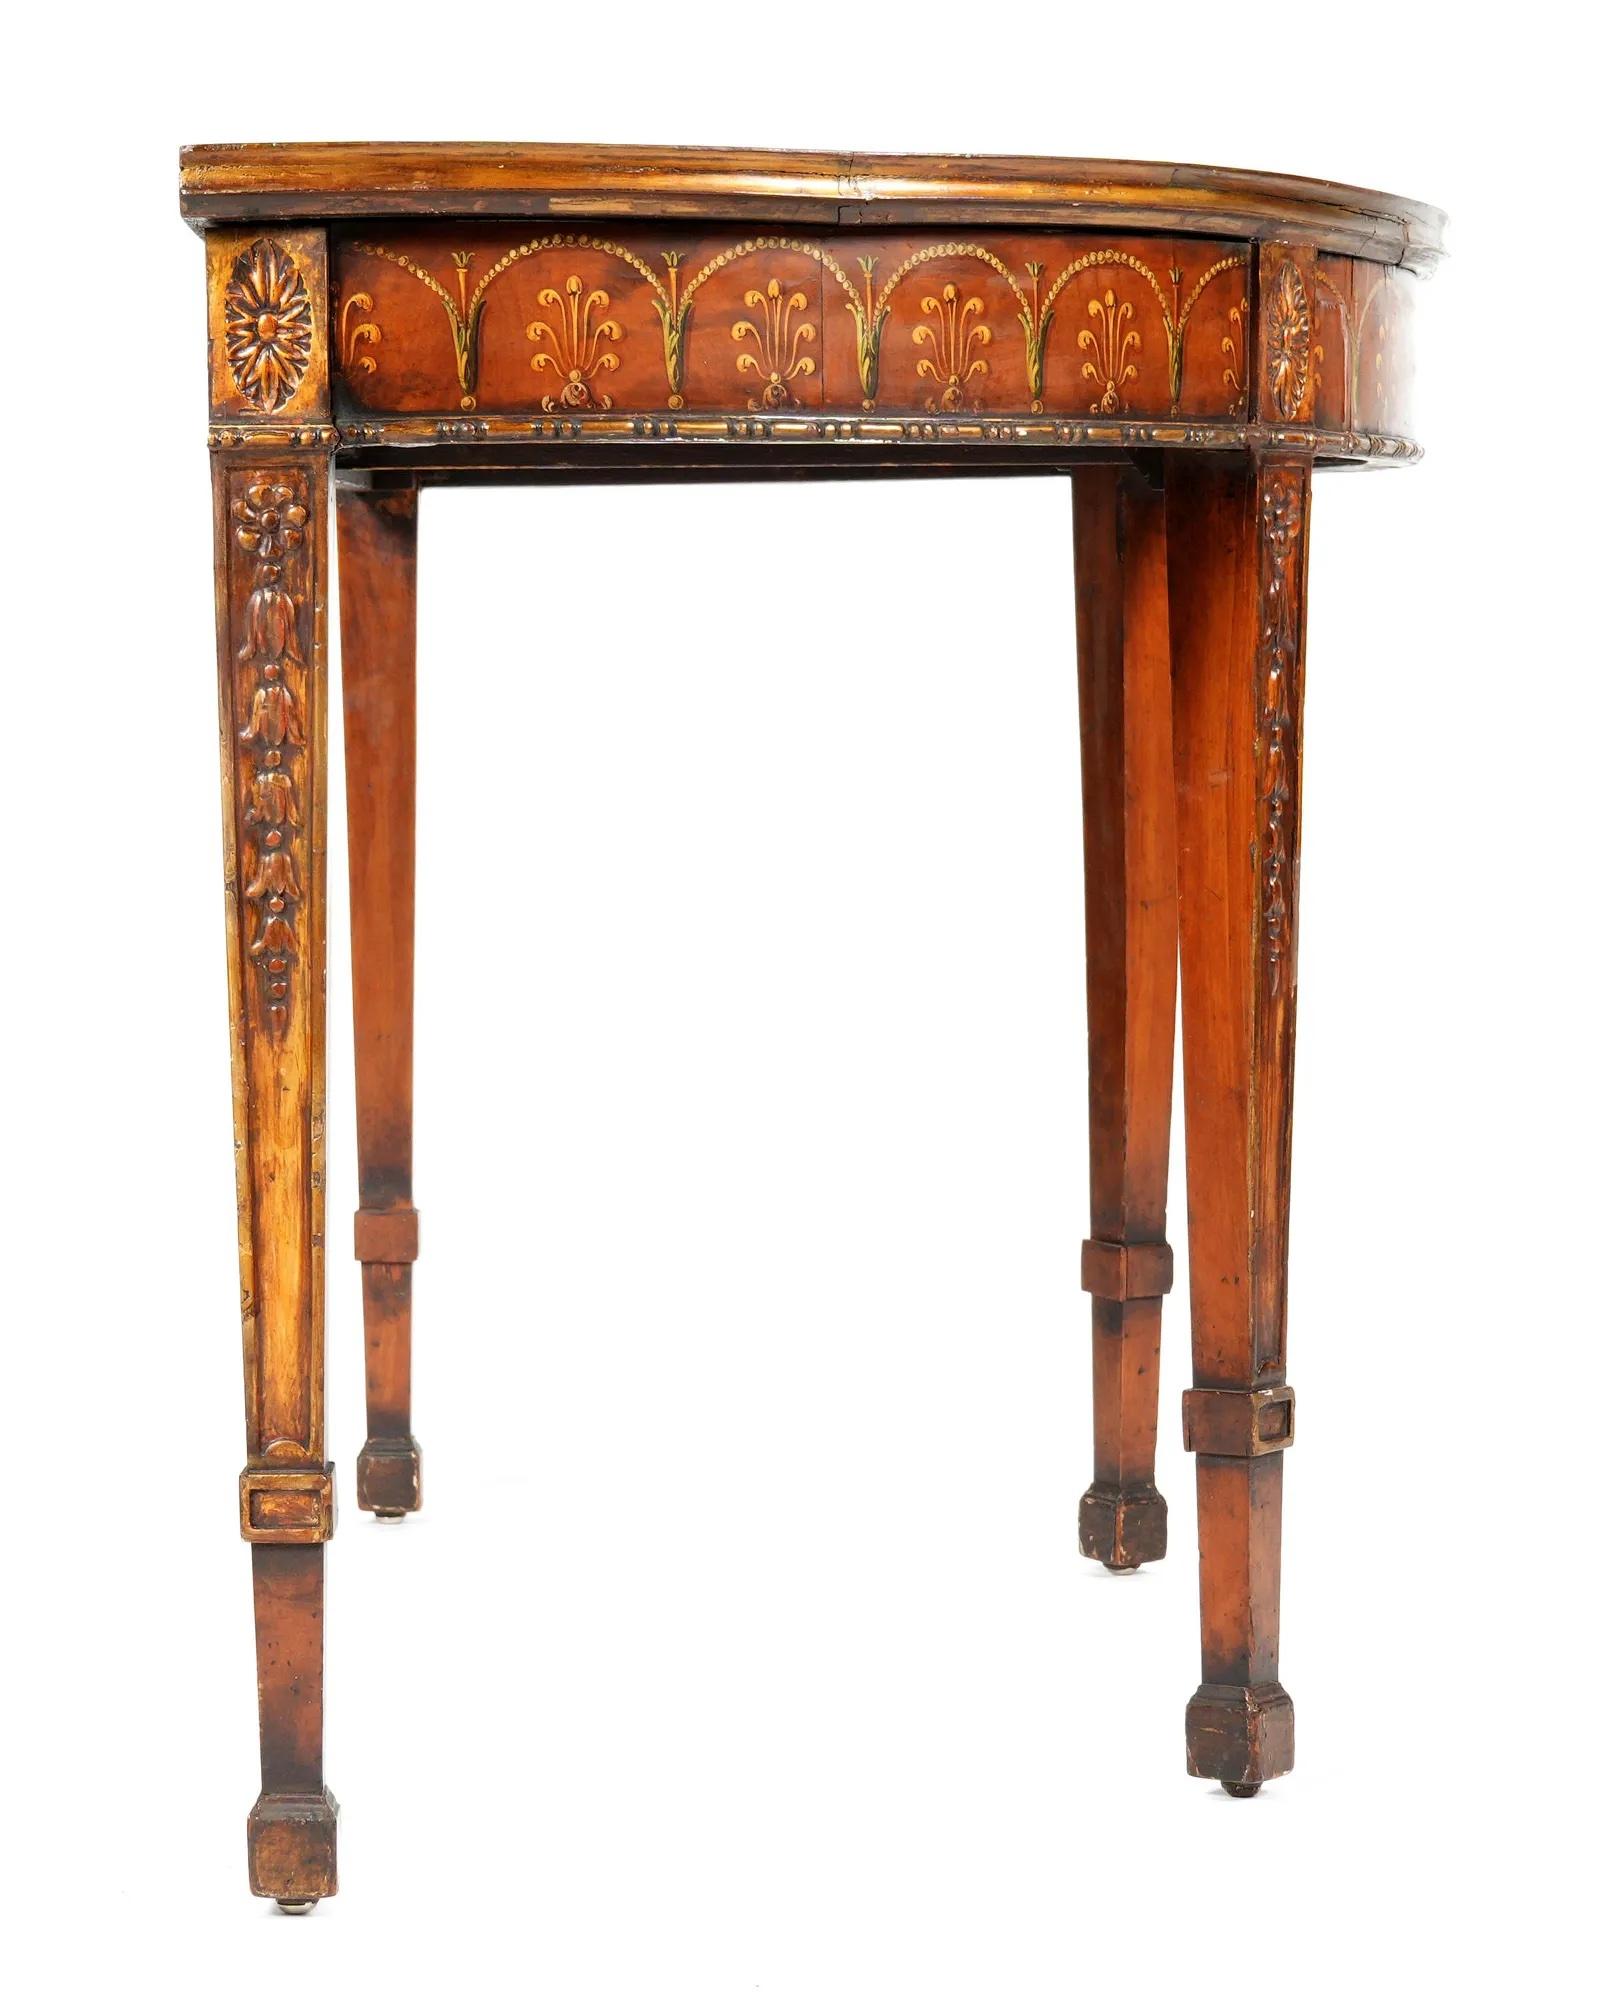 Late 18th Century Adam Painted and Gilt Satinwood Demilune Console Table In Good Condition For Sale In Essex, MA